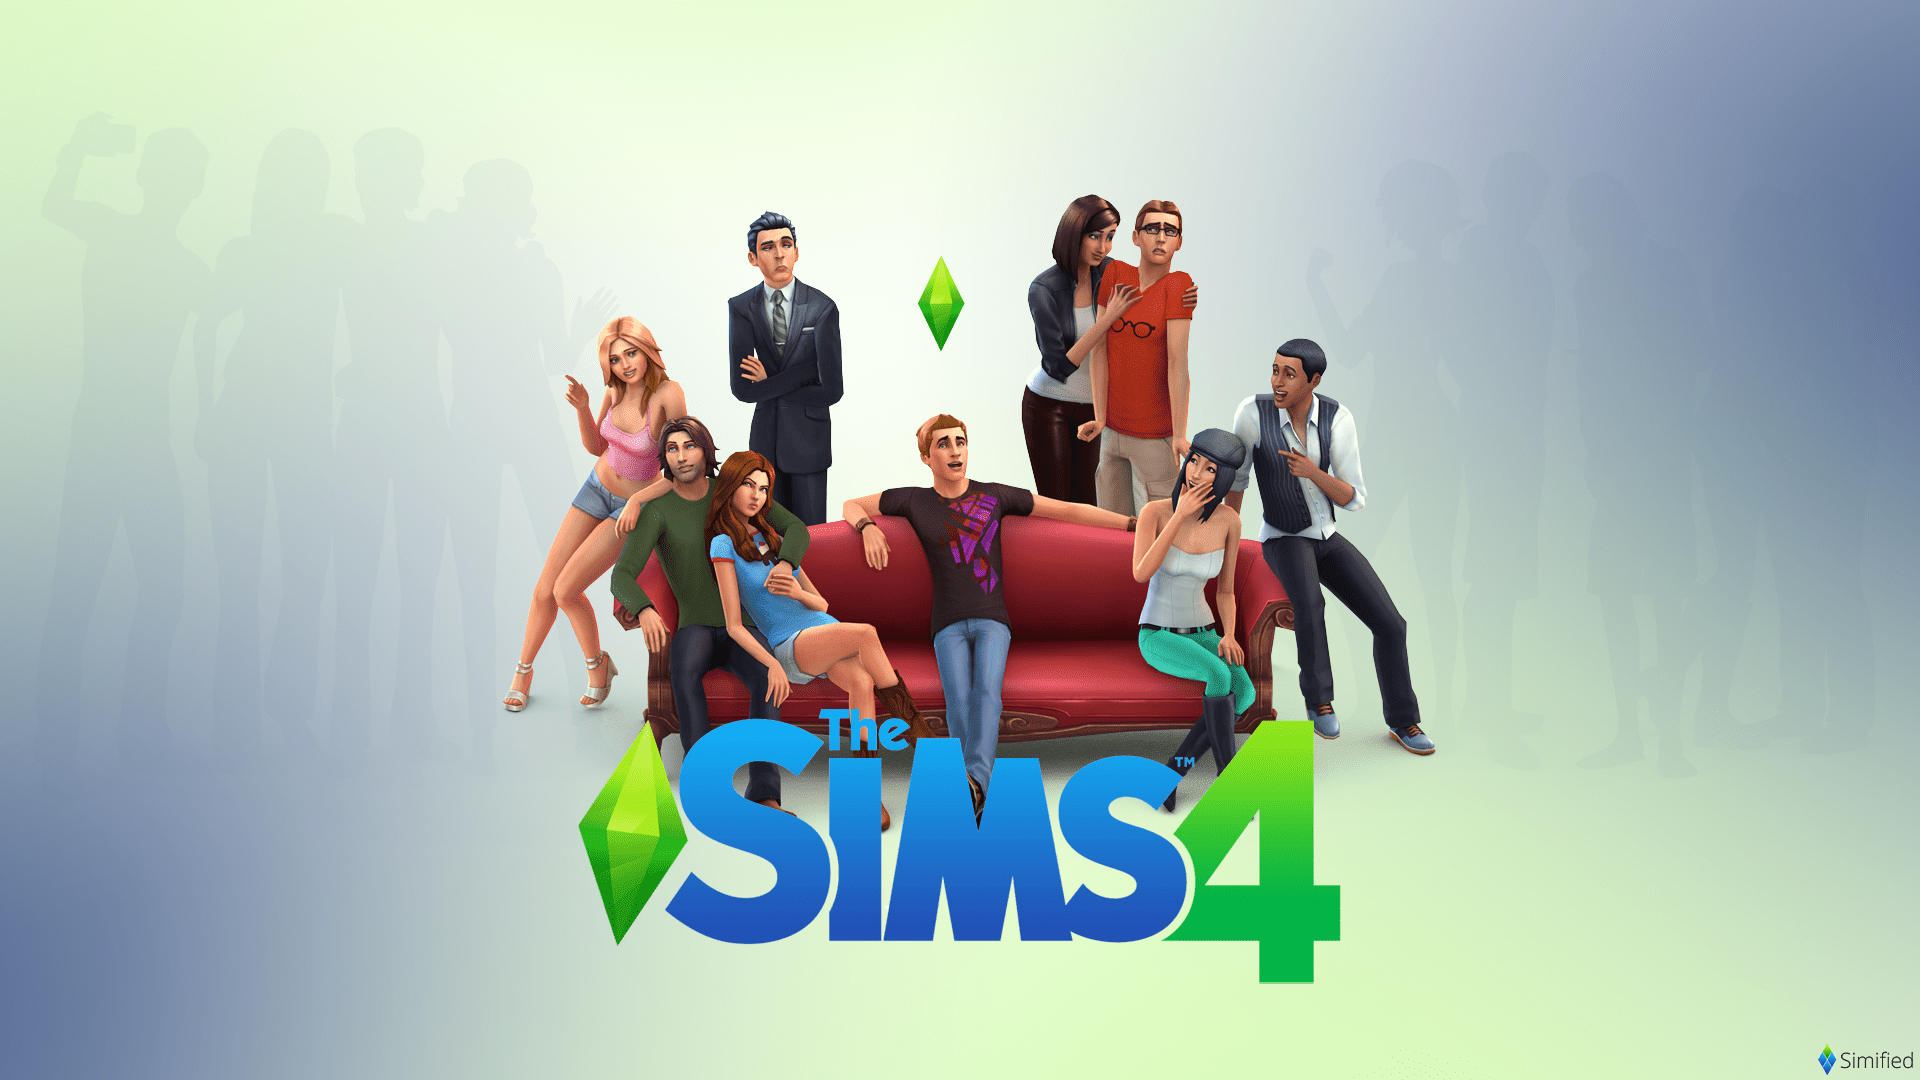 The sims 4 download free windows 10